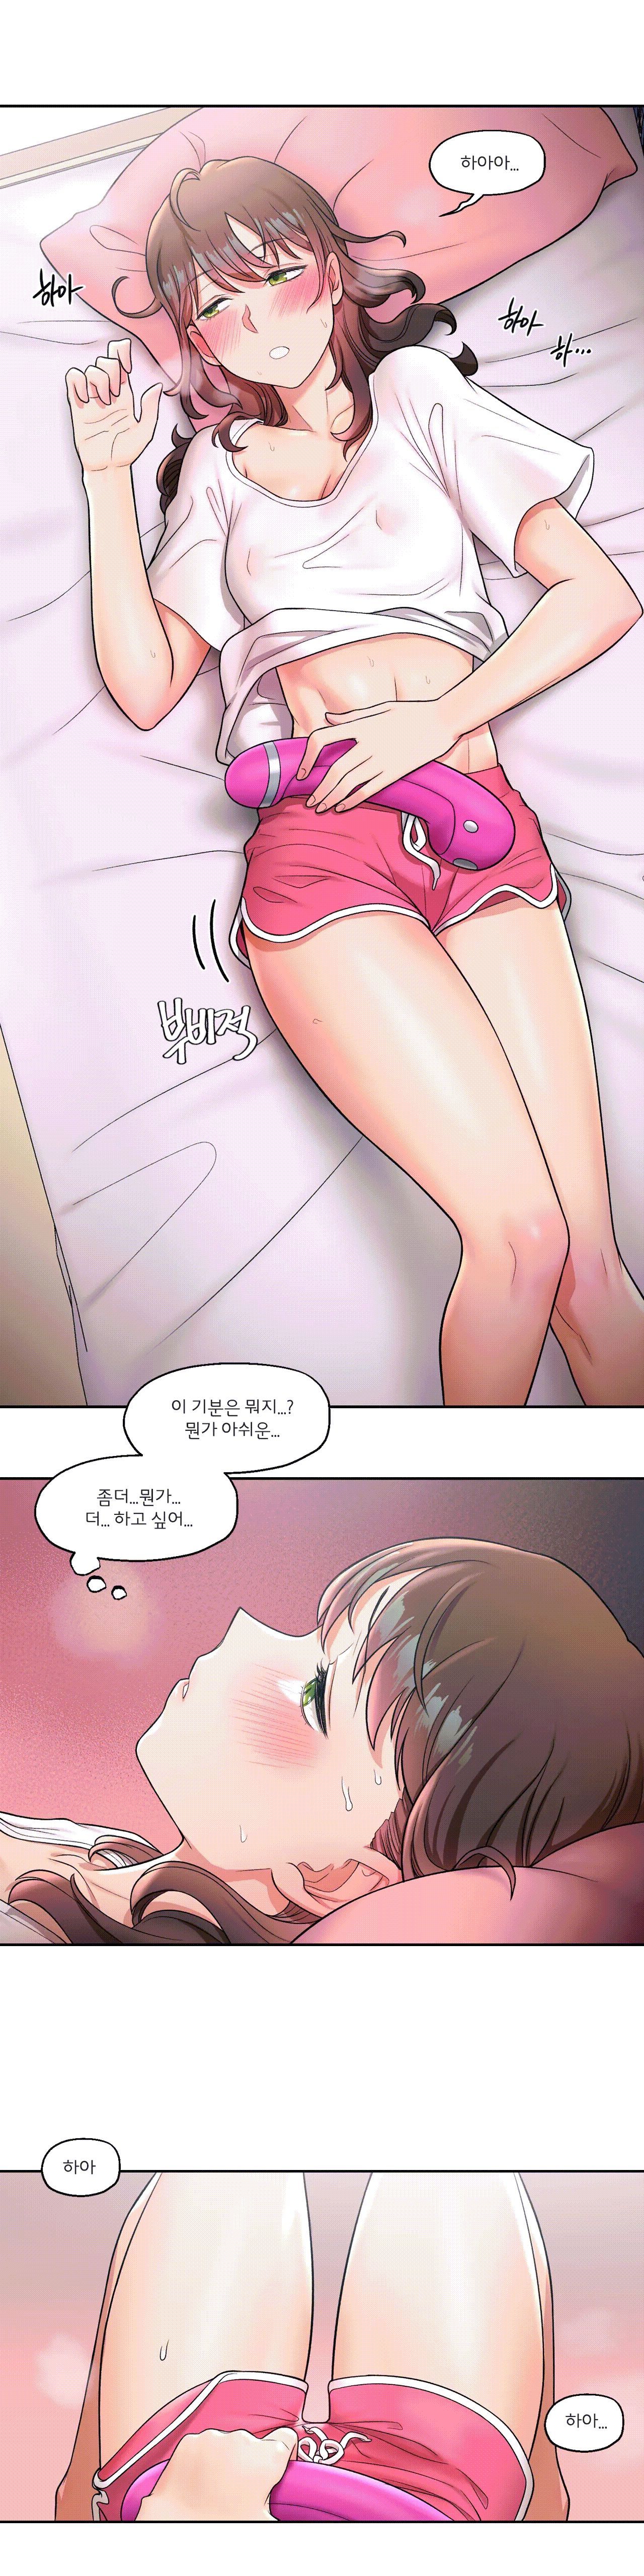 Sexercise Raw - Chapter 31 Page 7